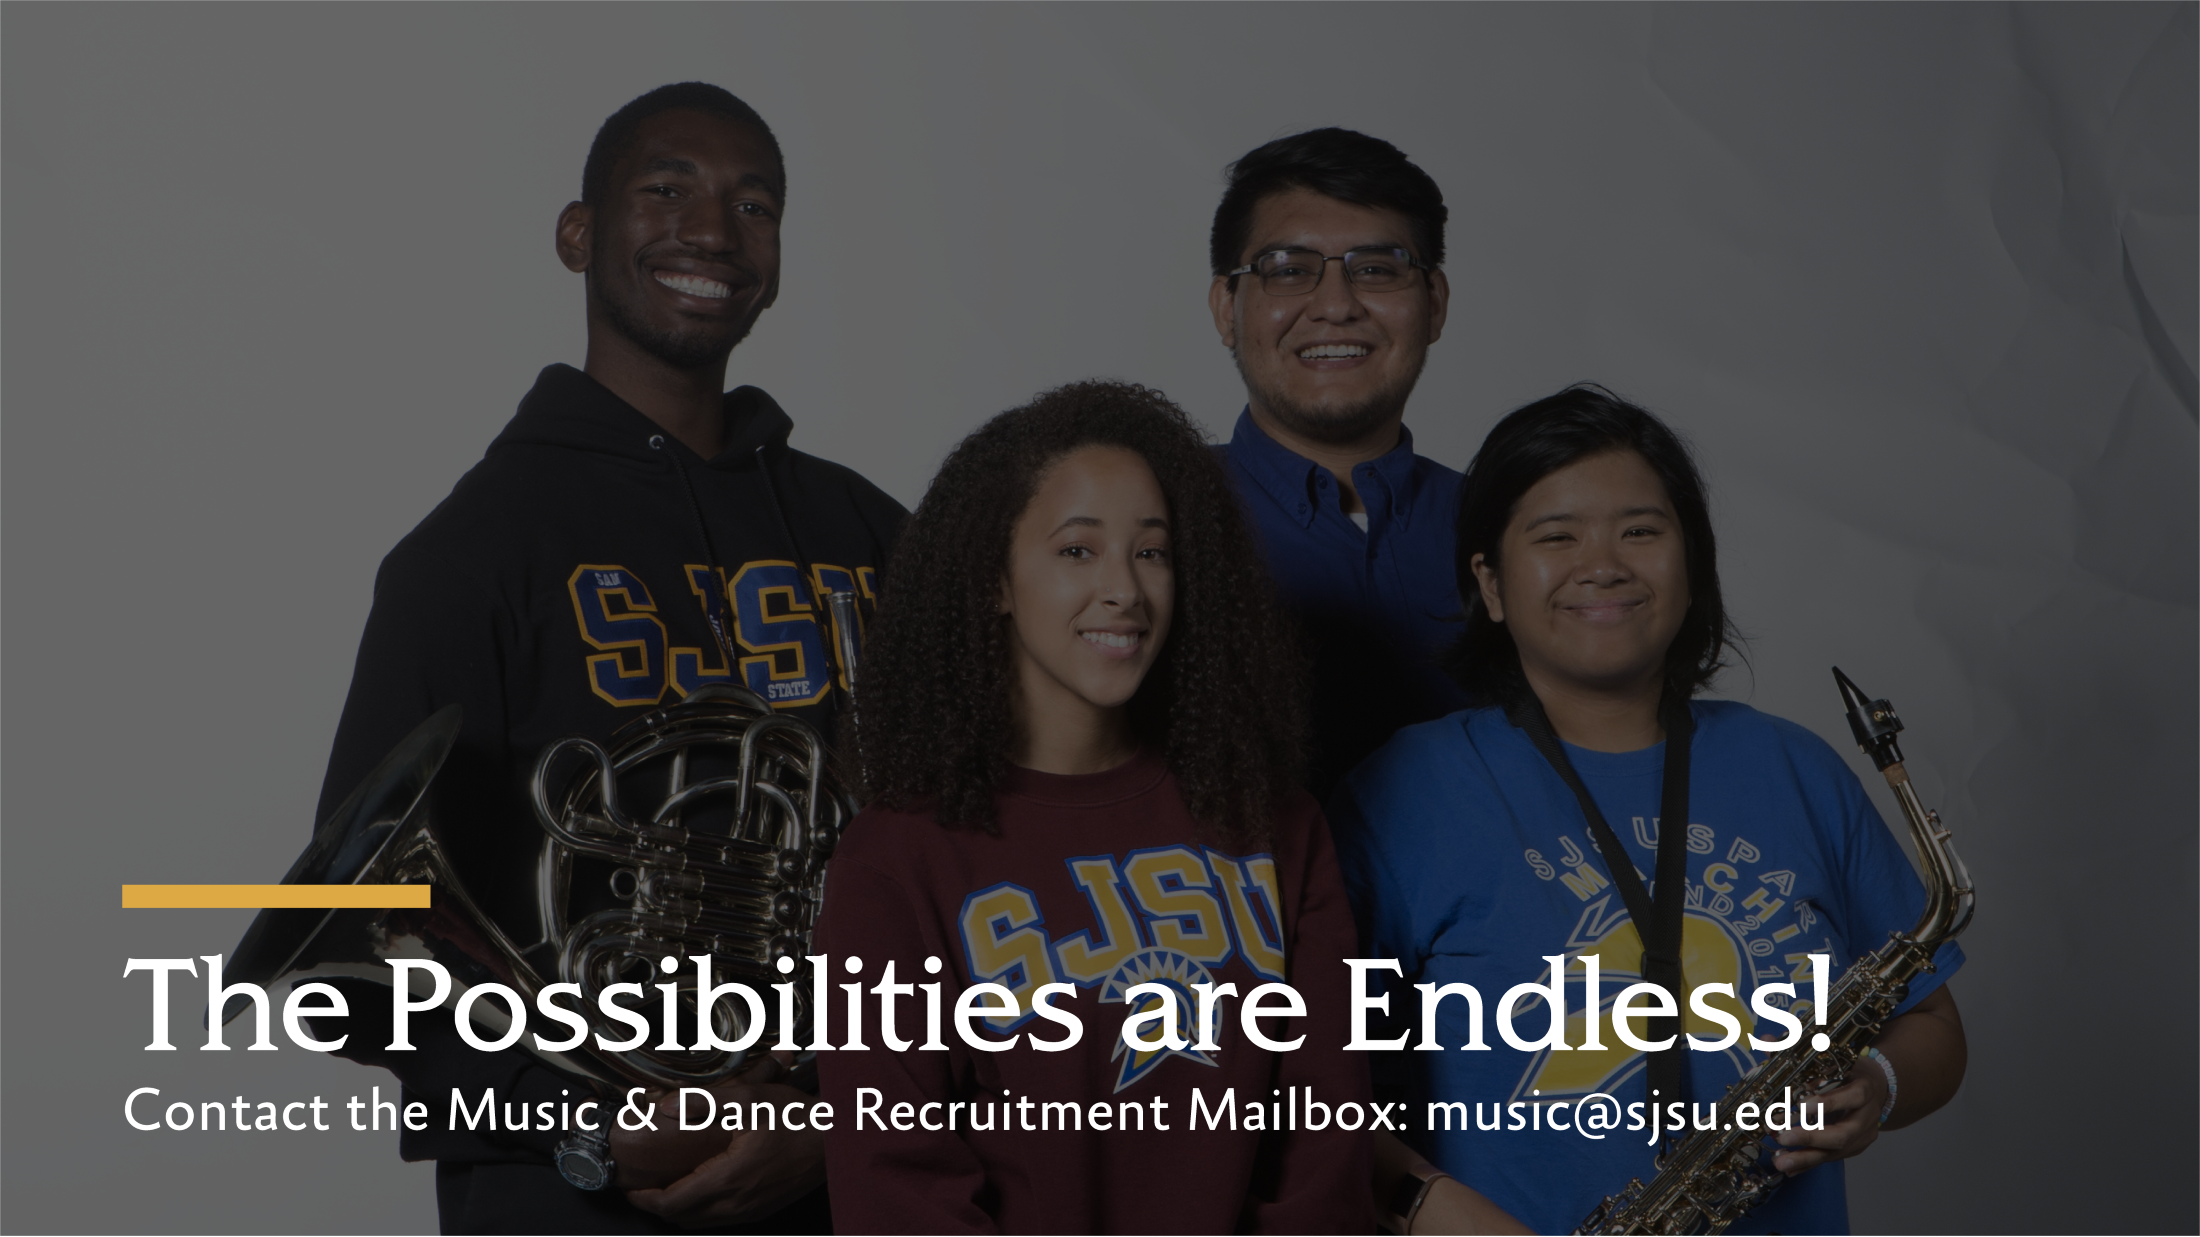 Admissions at SJSU's School of Music and Dance